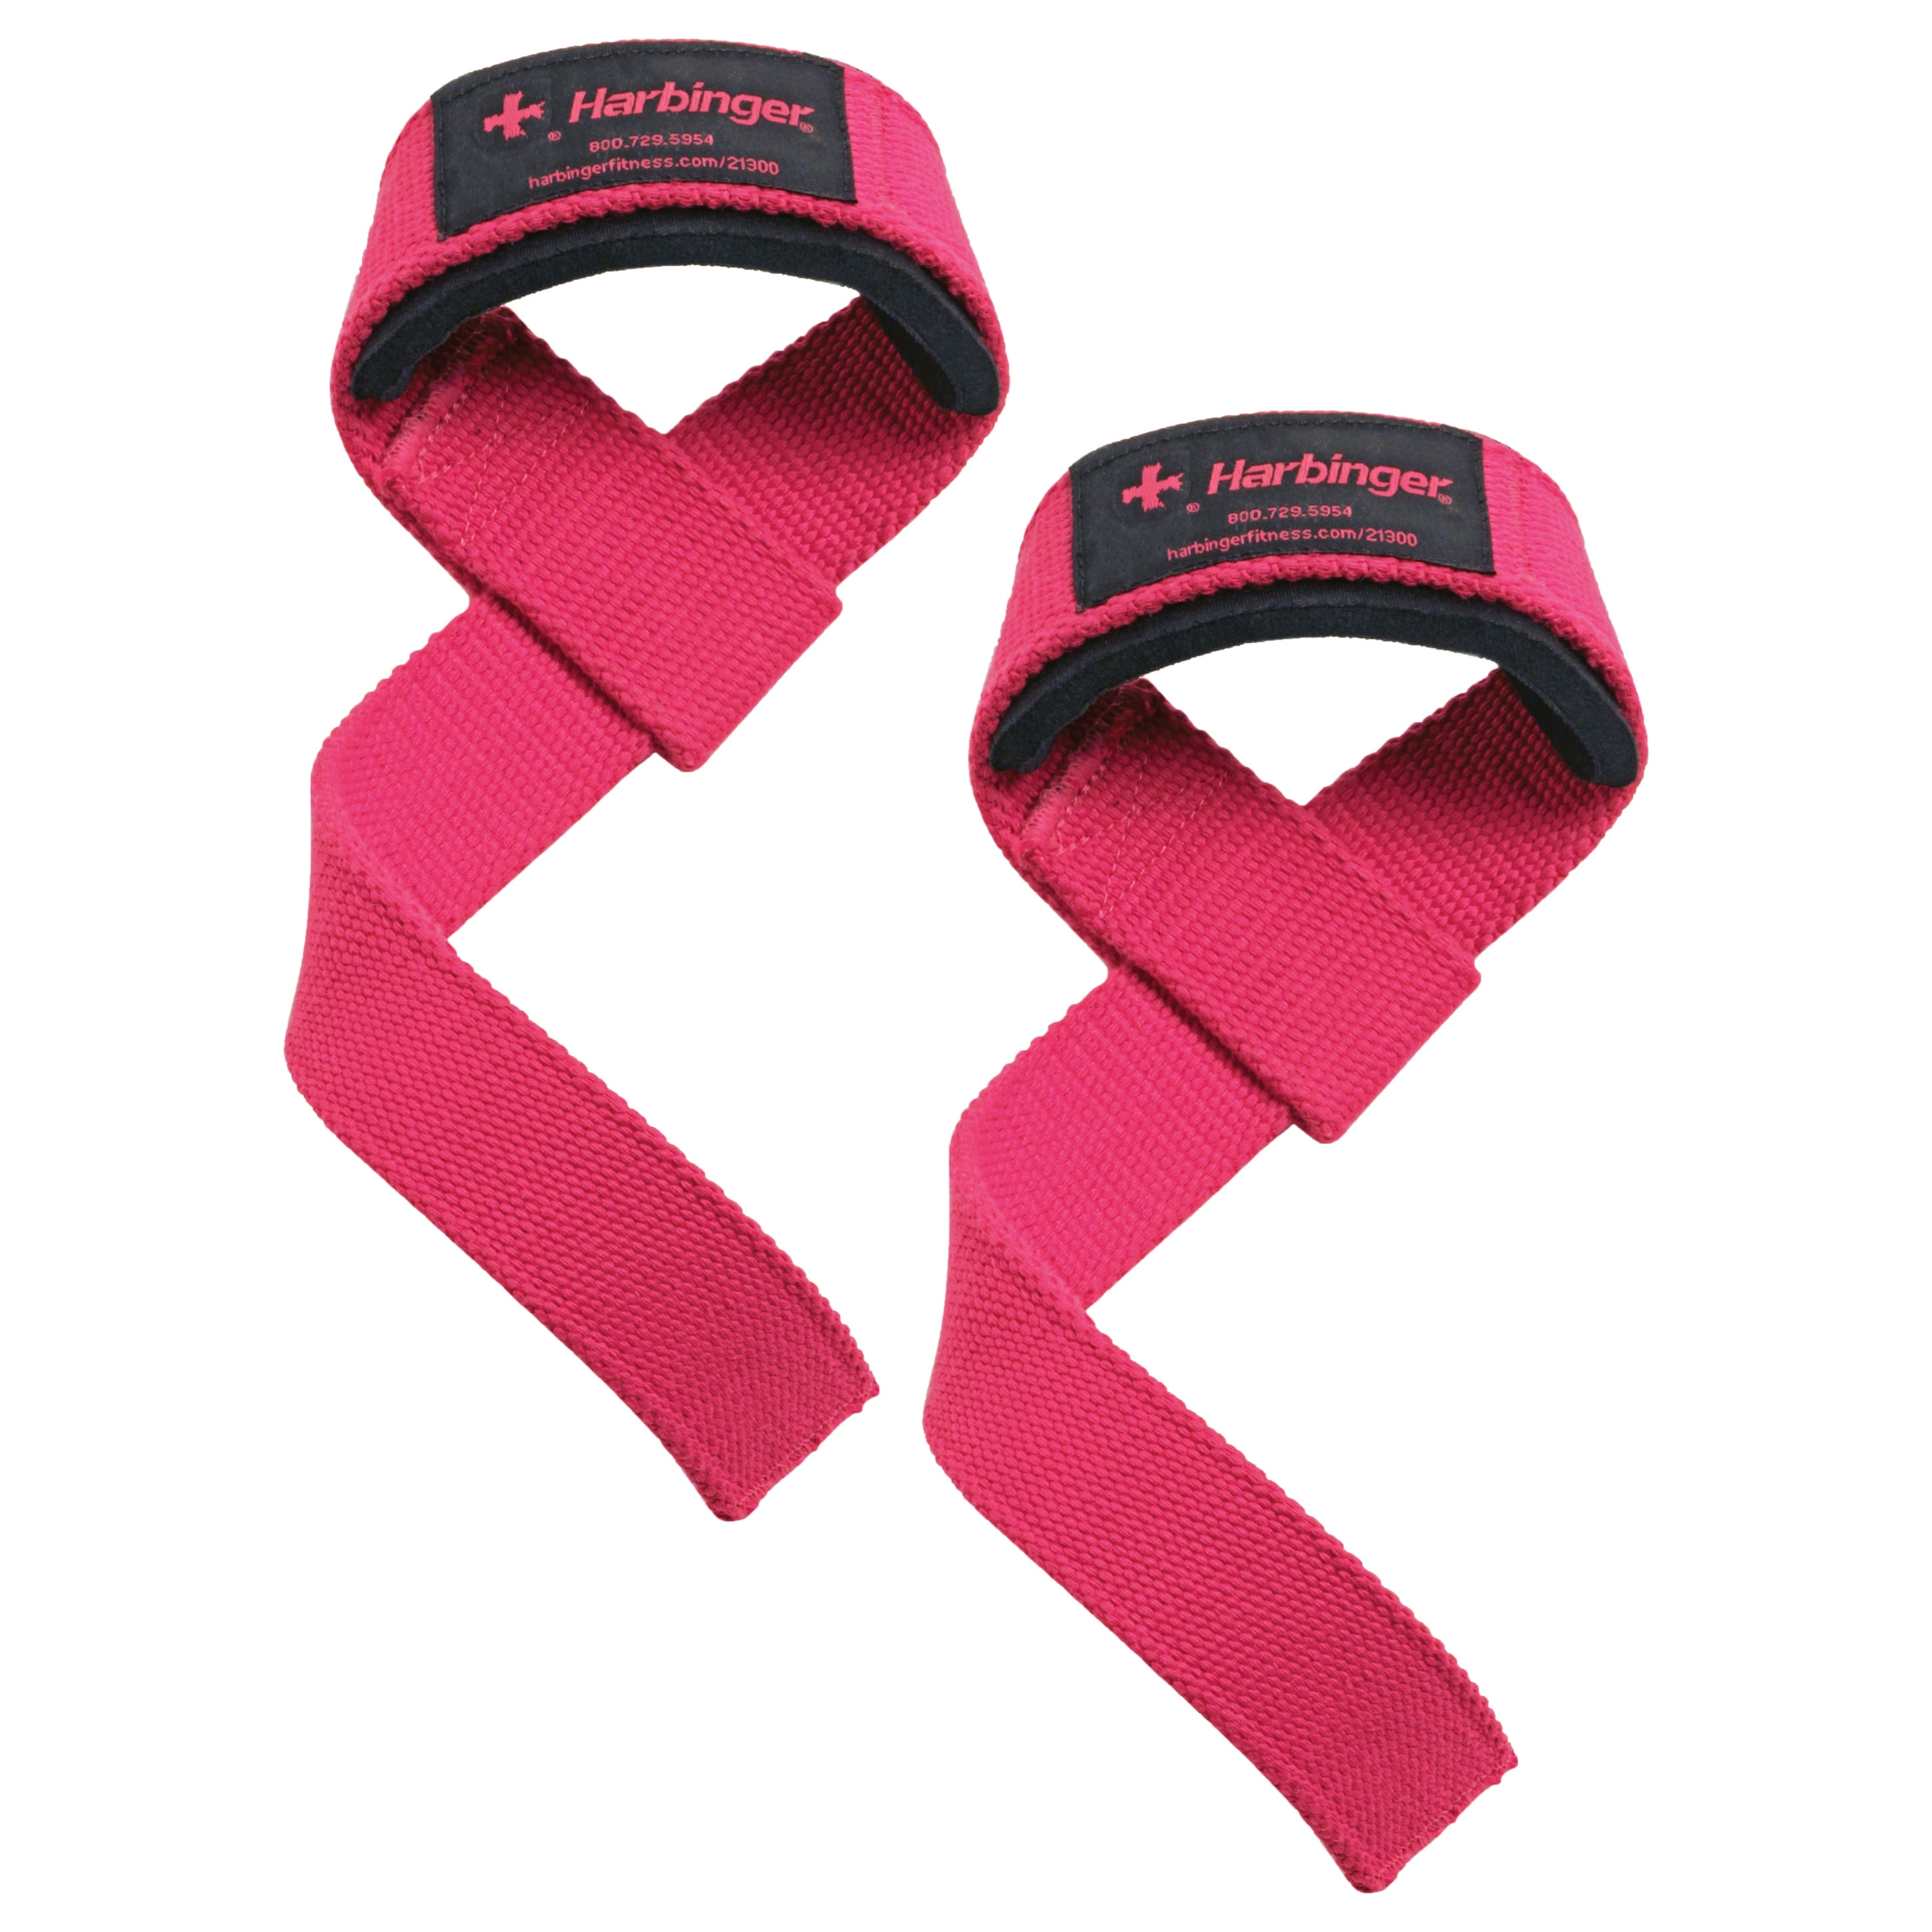 Harbinger Padded Cotton Lifting Straps with NeoTek Cushioned Wrist (Pair)